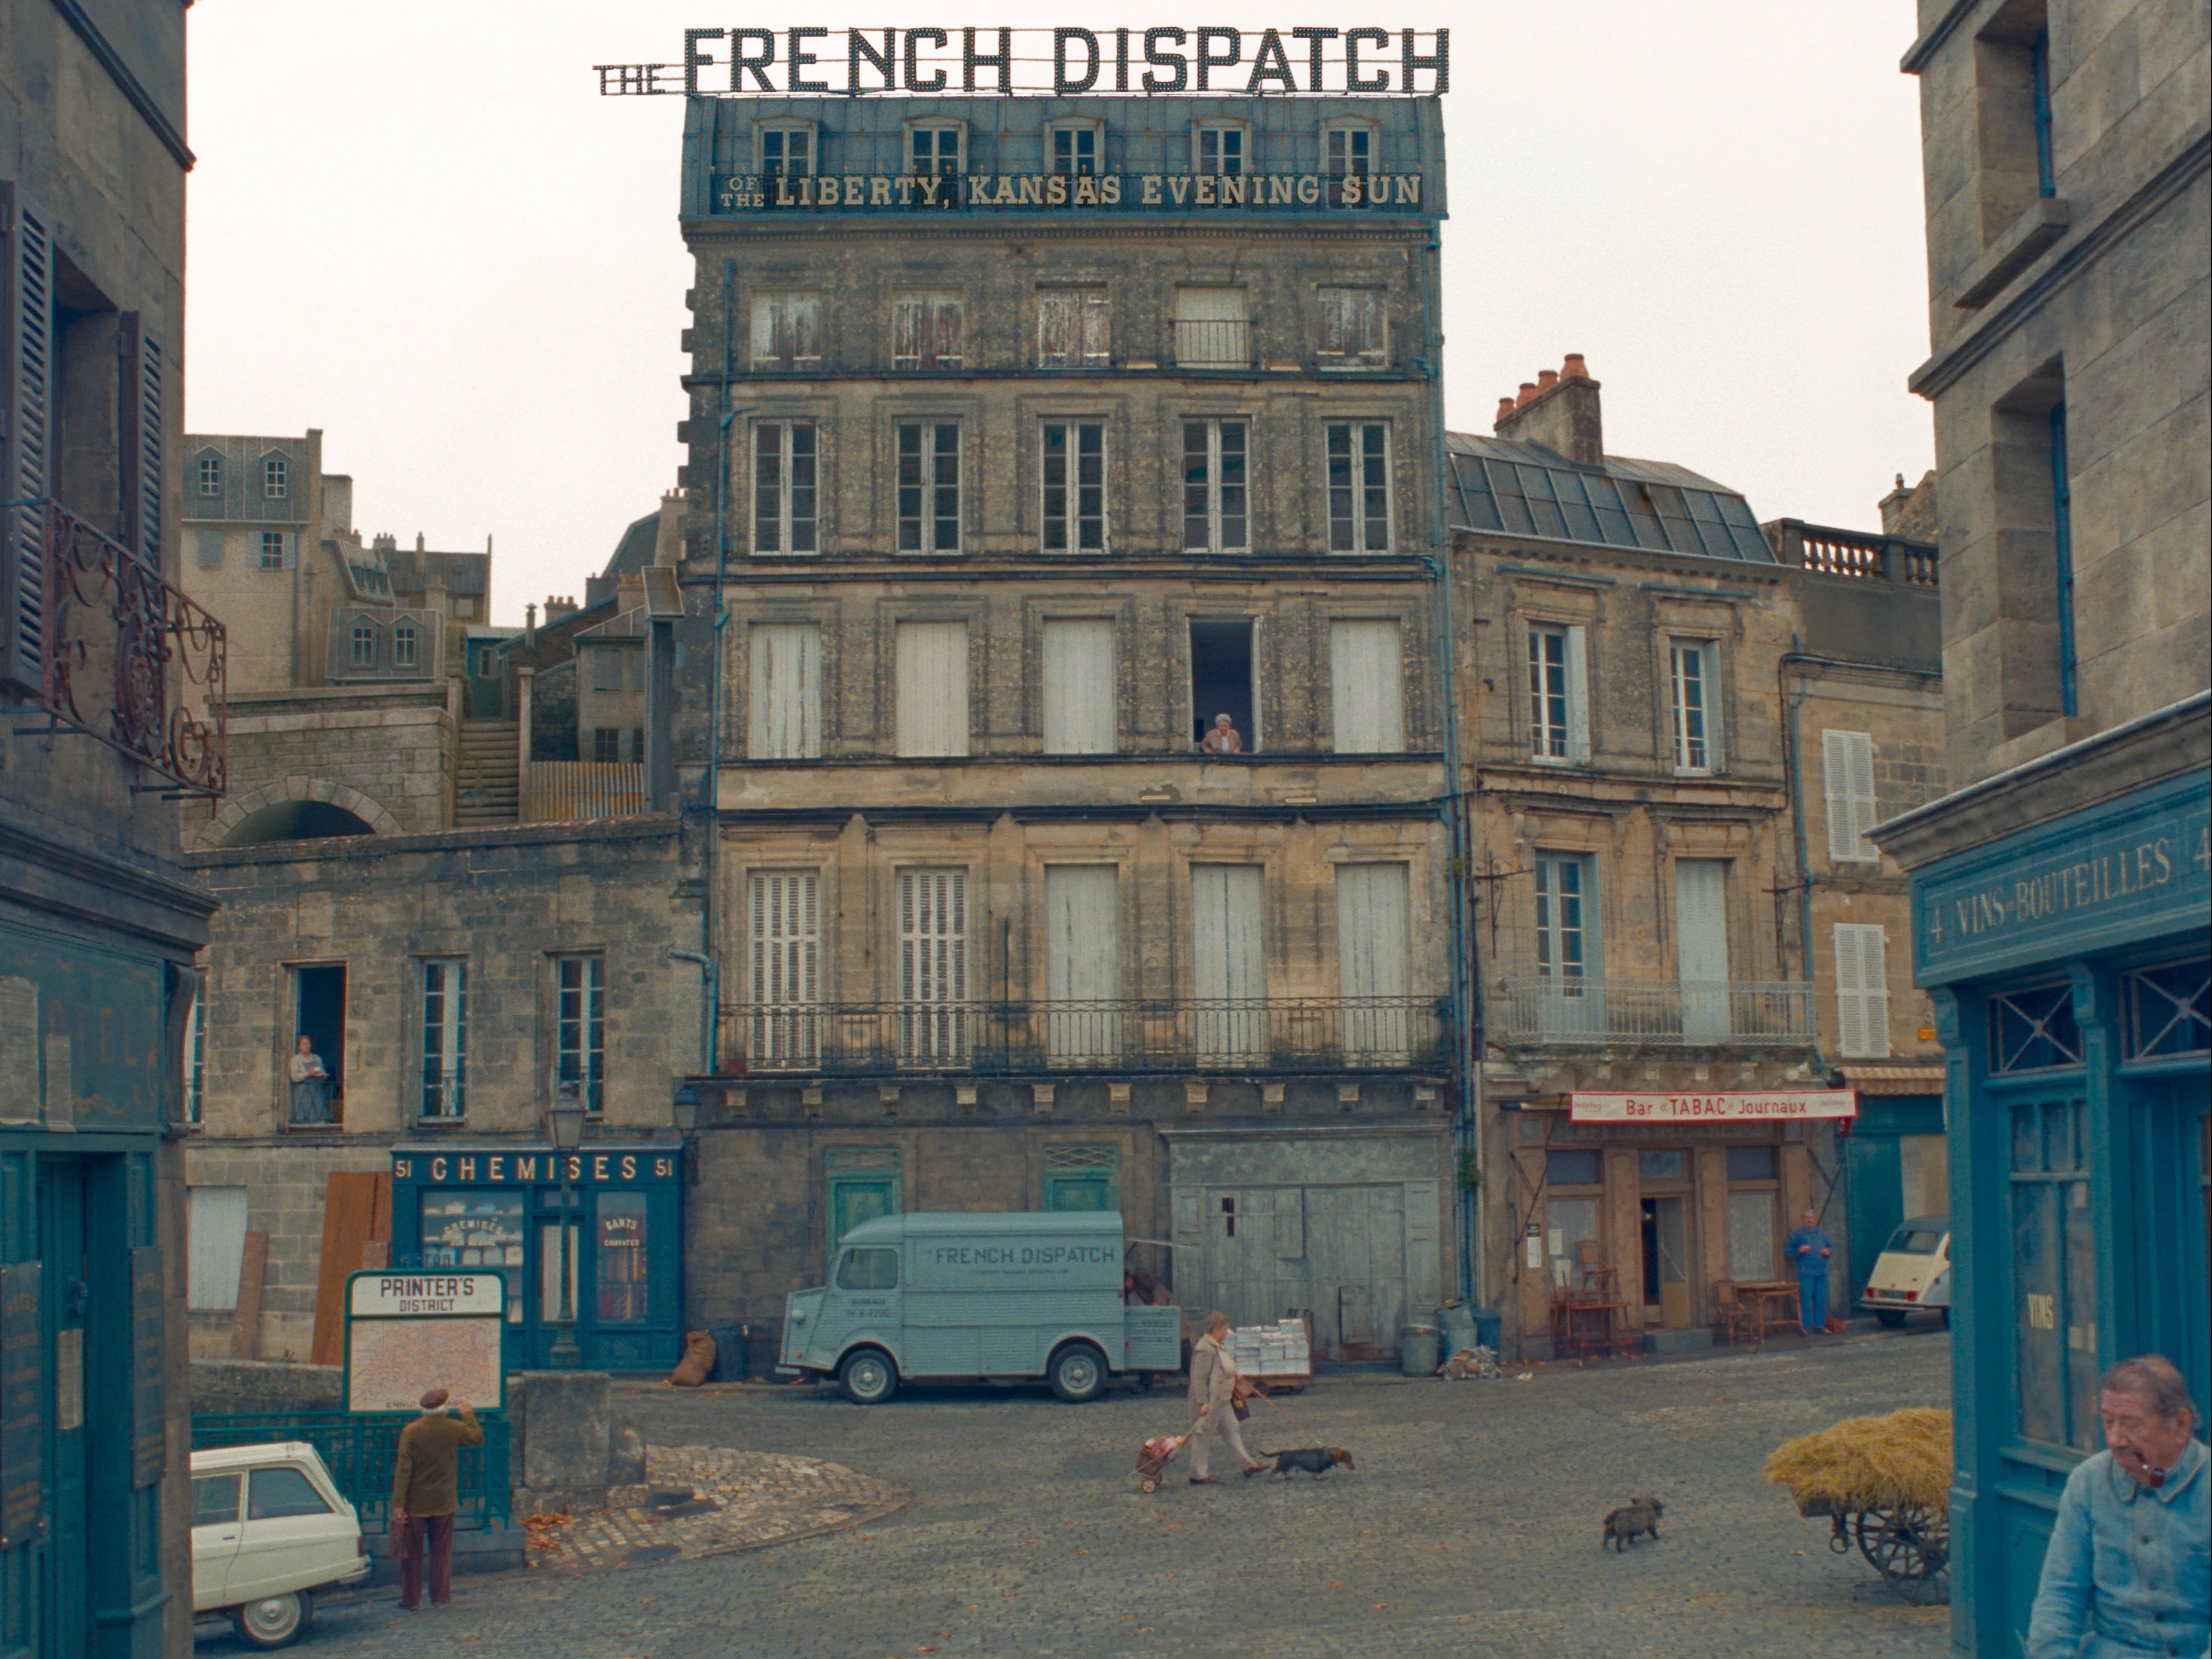 The offices of the New Yorker-inspired French Dispatch, as imagined in Anderson’s new film